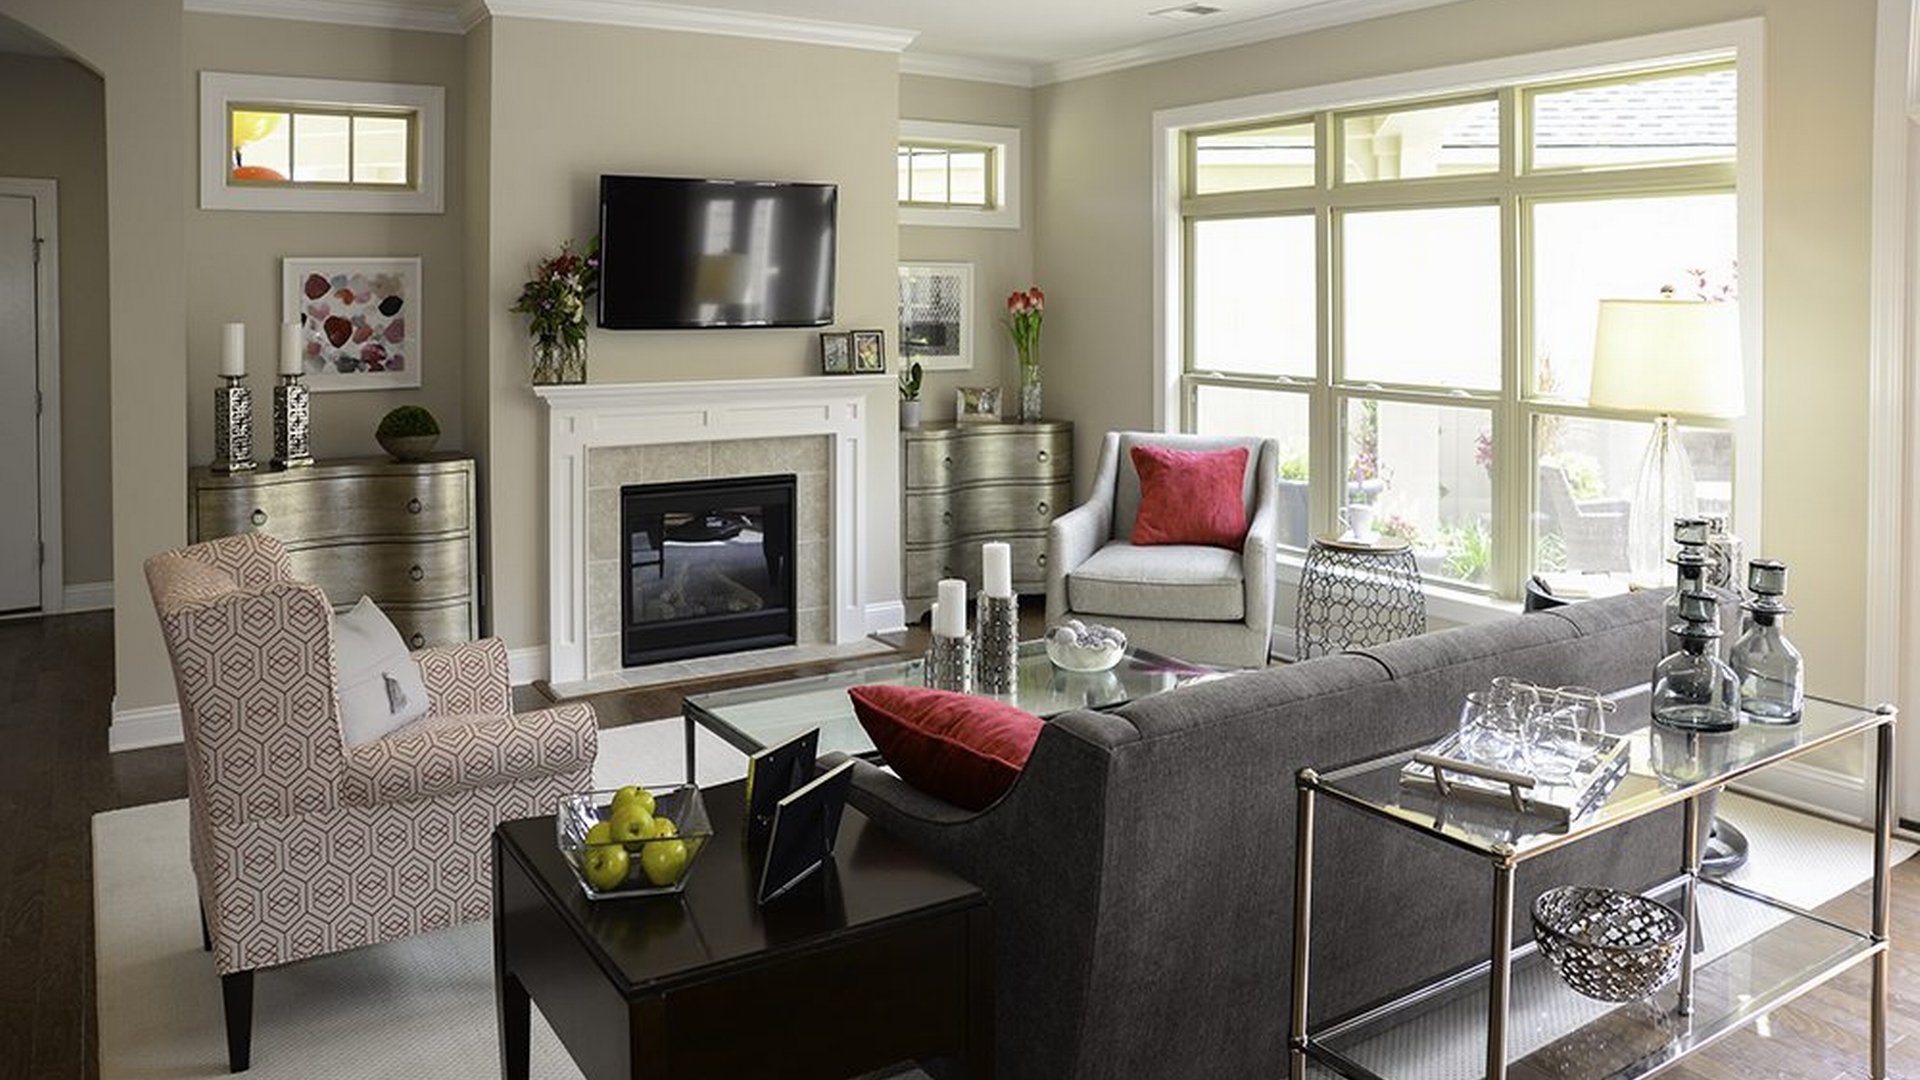 The Courtyards at Brookfield_Promenade_Interior_Living Room